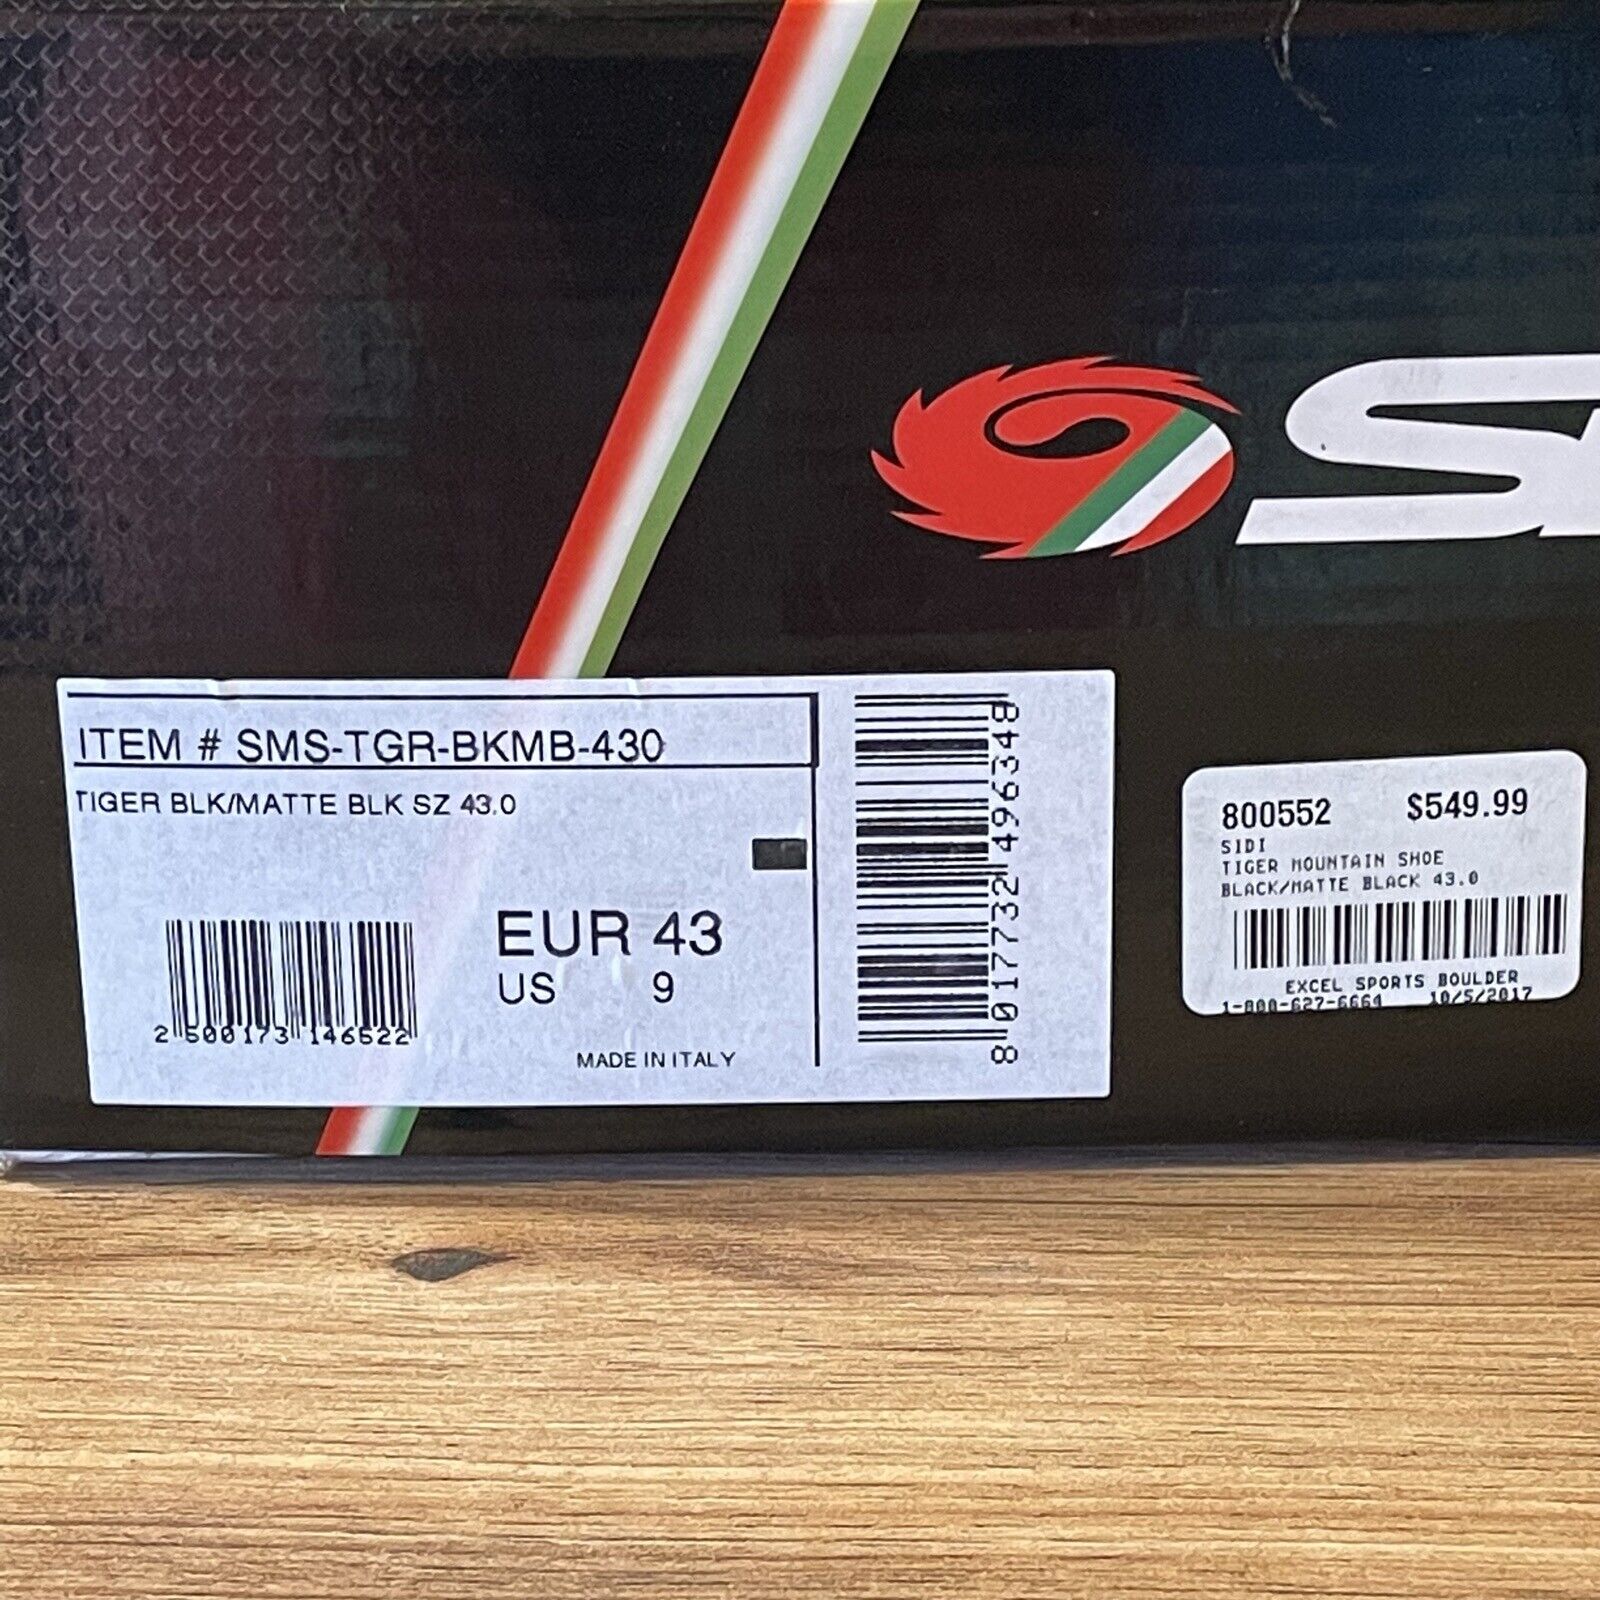 Sidi Tiger Limited Edition 43 Carbon Sole Mountain Bike Shoes 9-9.5 Black